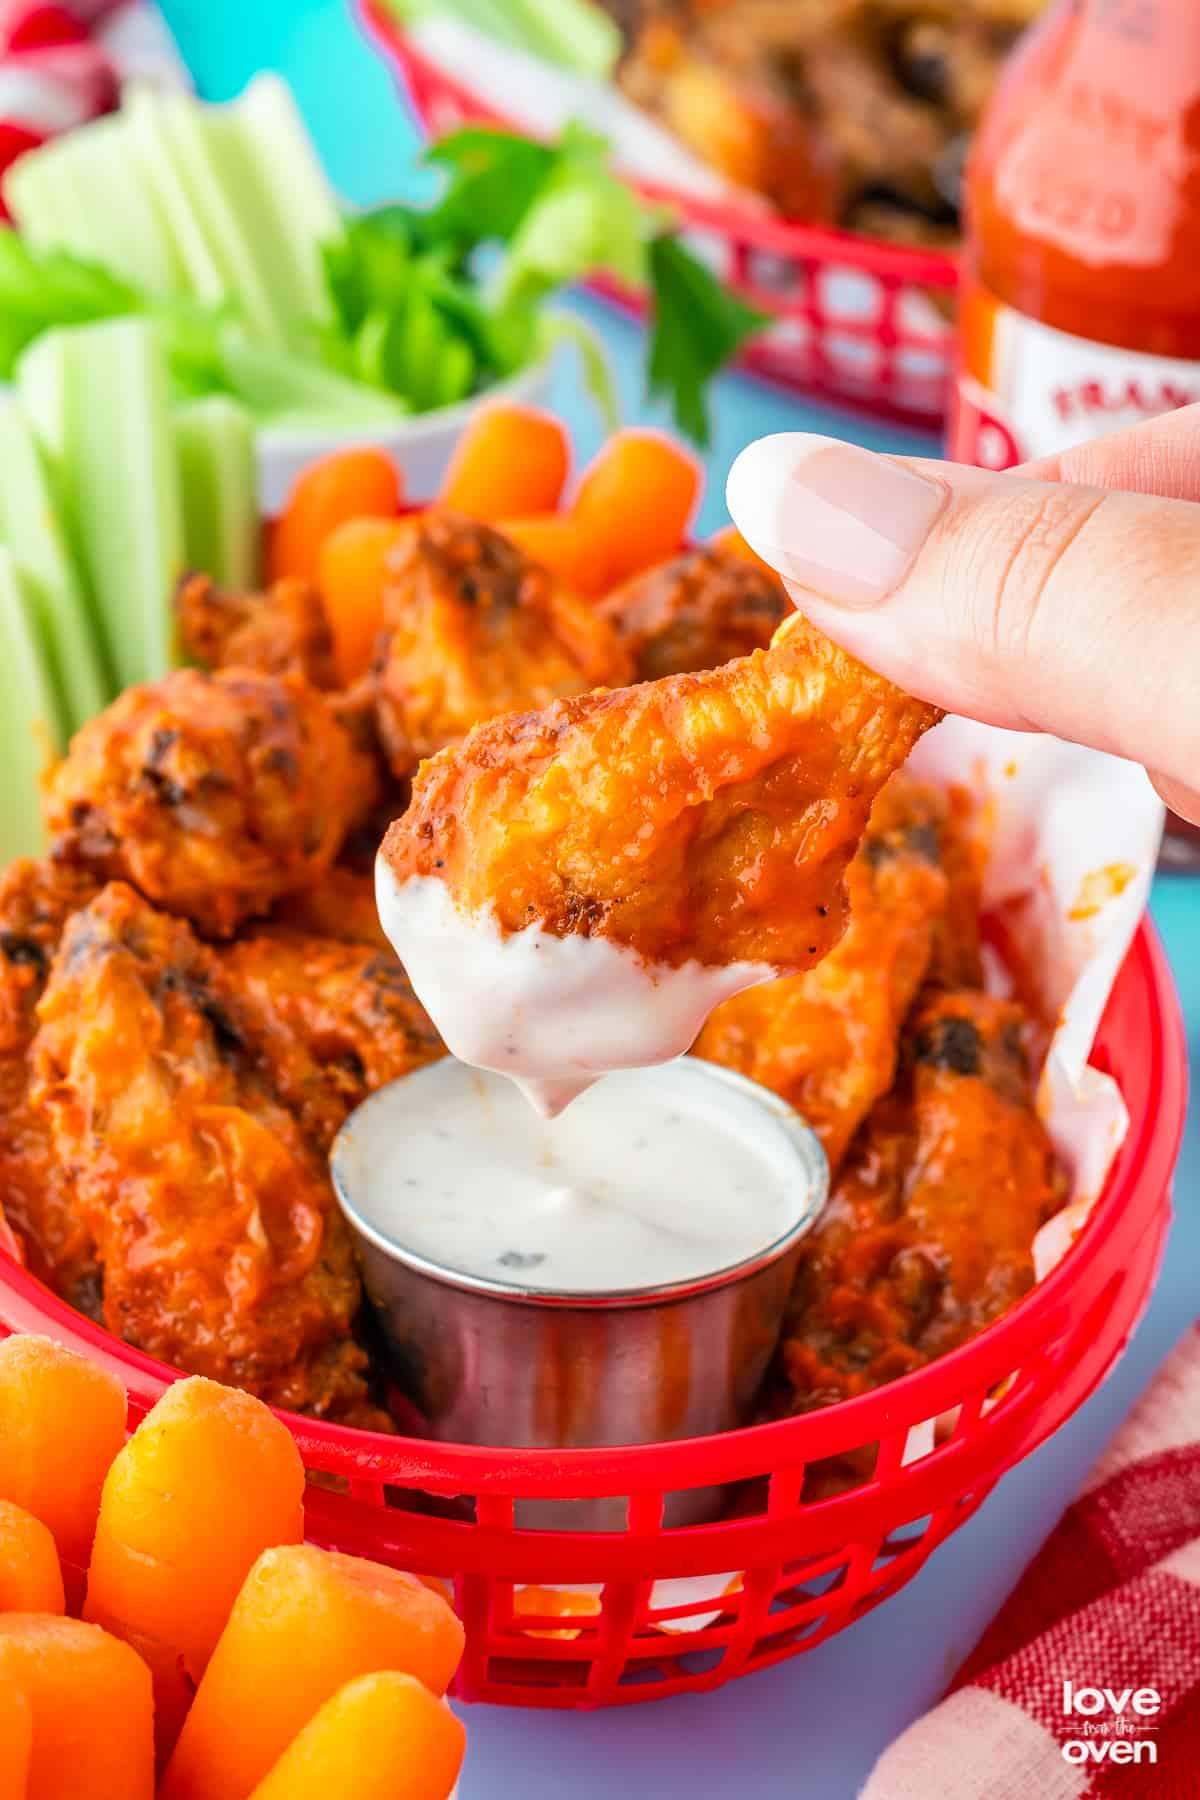 Frozen Chicken Wings in Air Fryer (No-Thaw Recipe) - Insanely Good